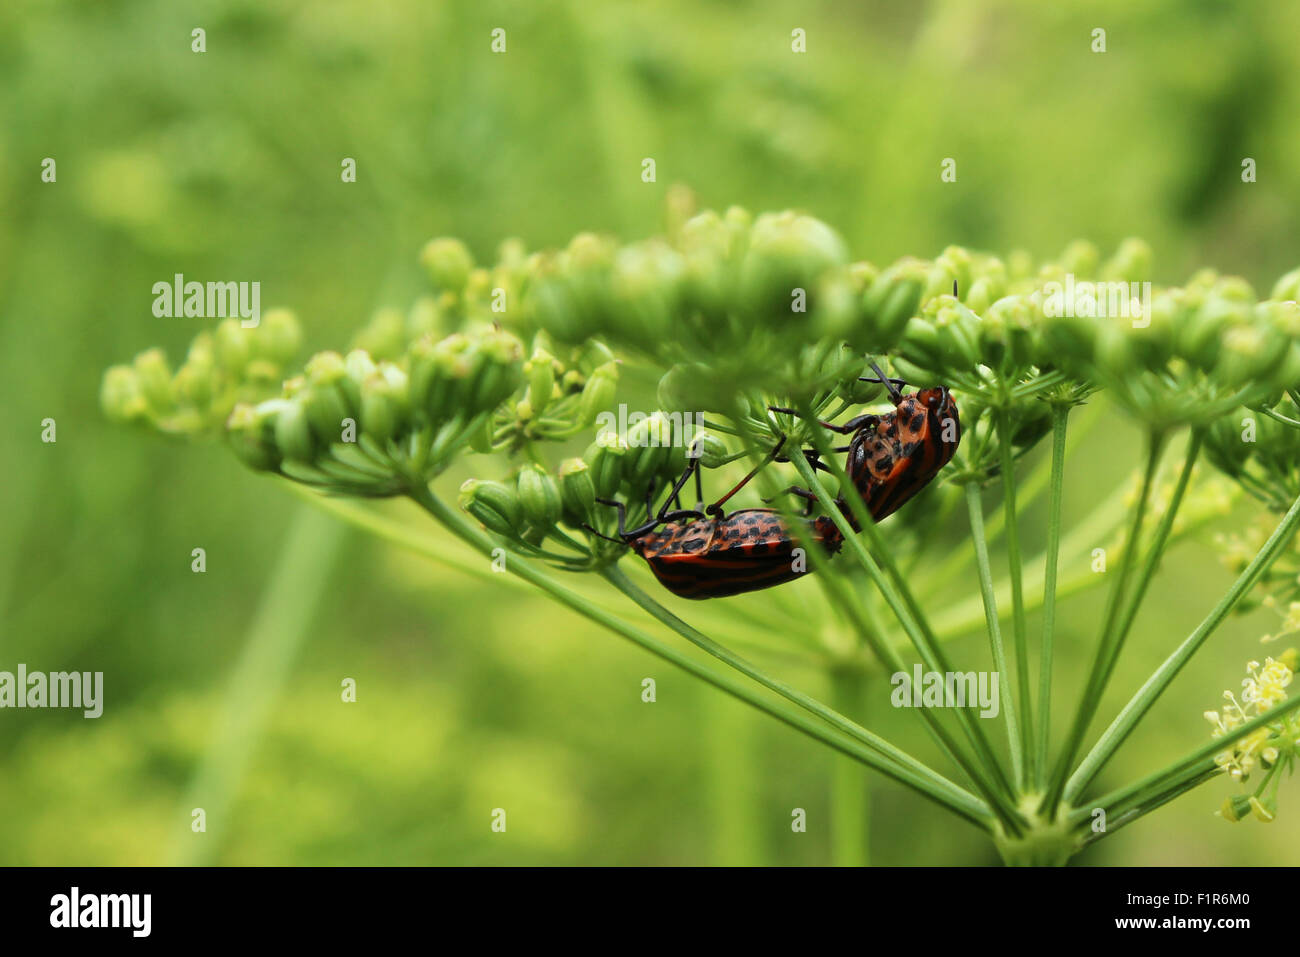 Insects on parsley plant Stock Photo